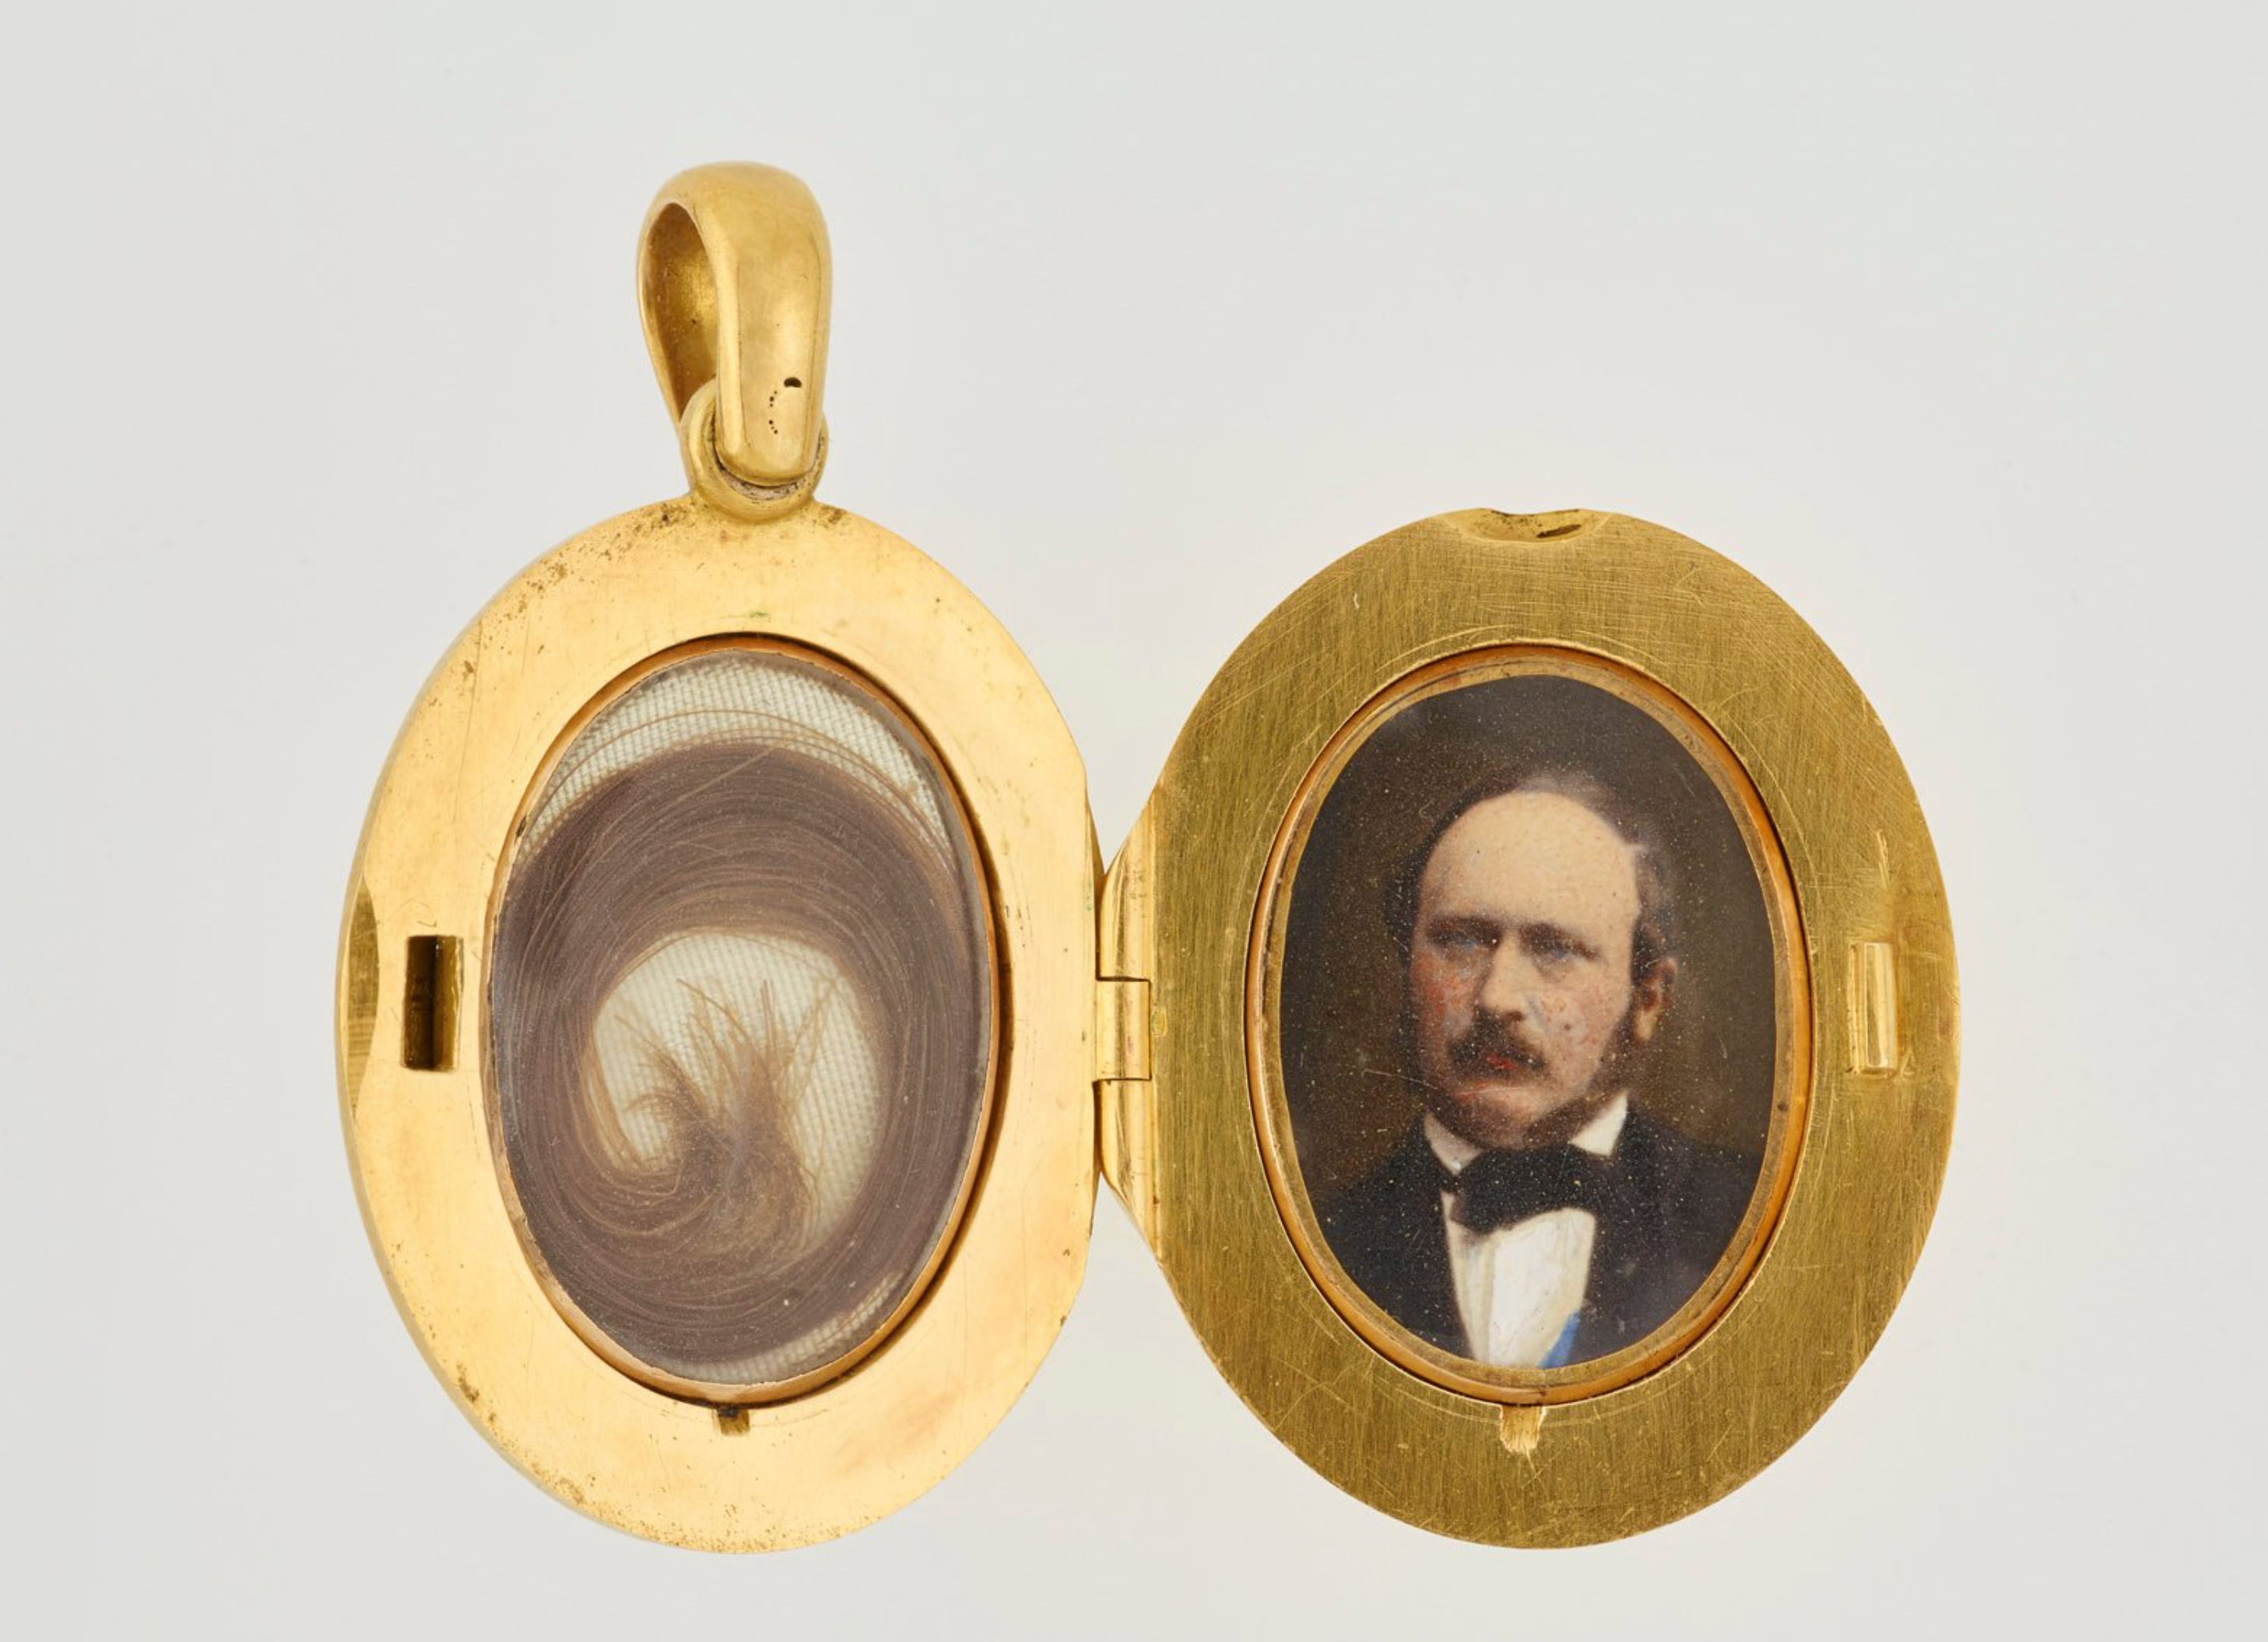 The locket opens to reveal hair on one side and photograph of Prince Albert on the other, both under glass, in the Royal Collection Trust